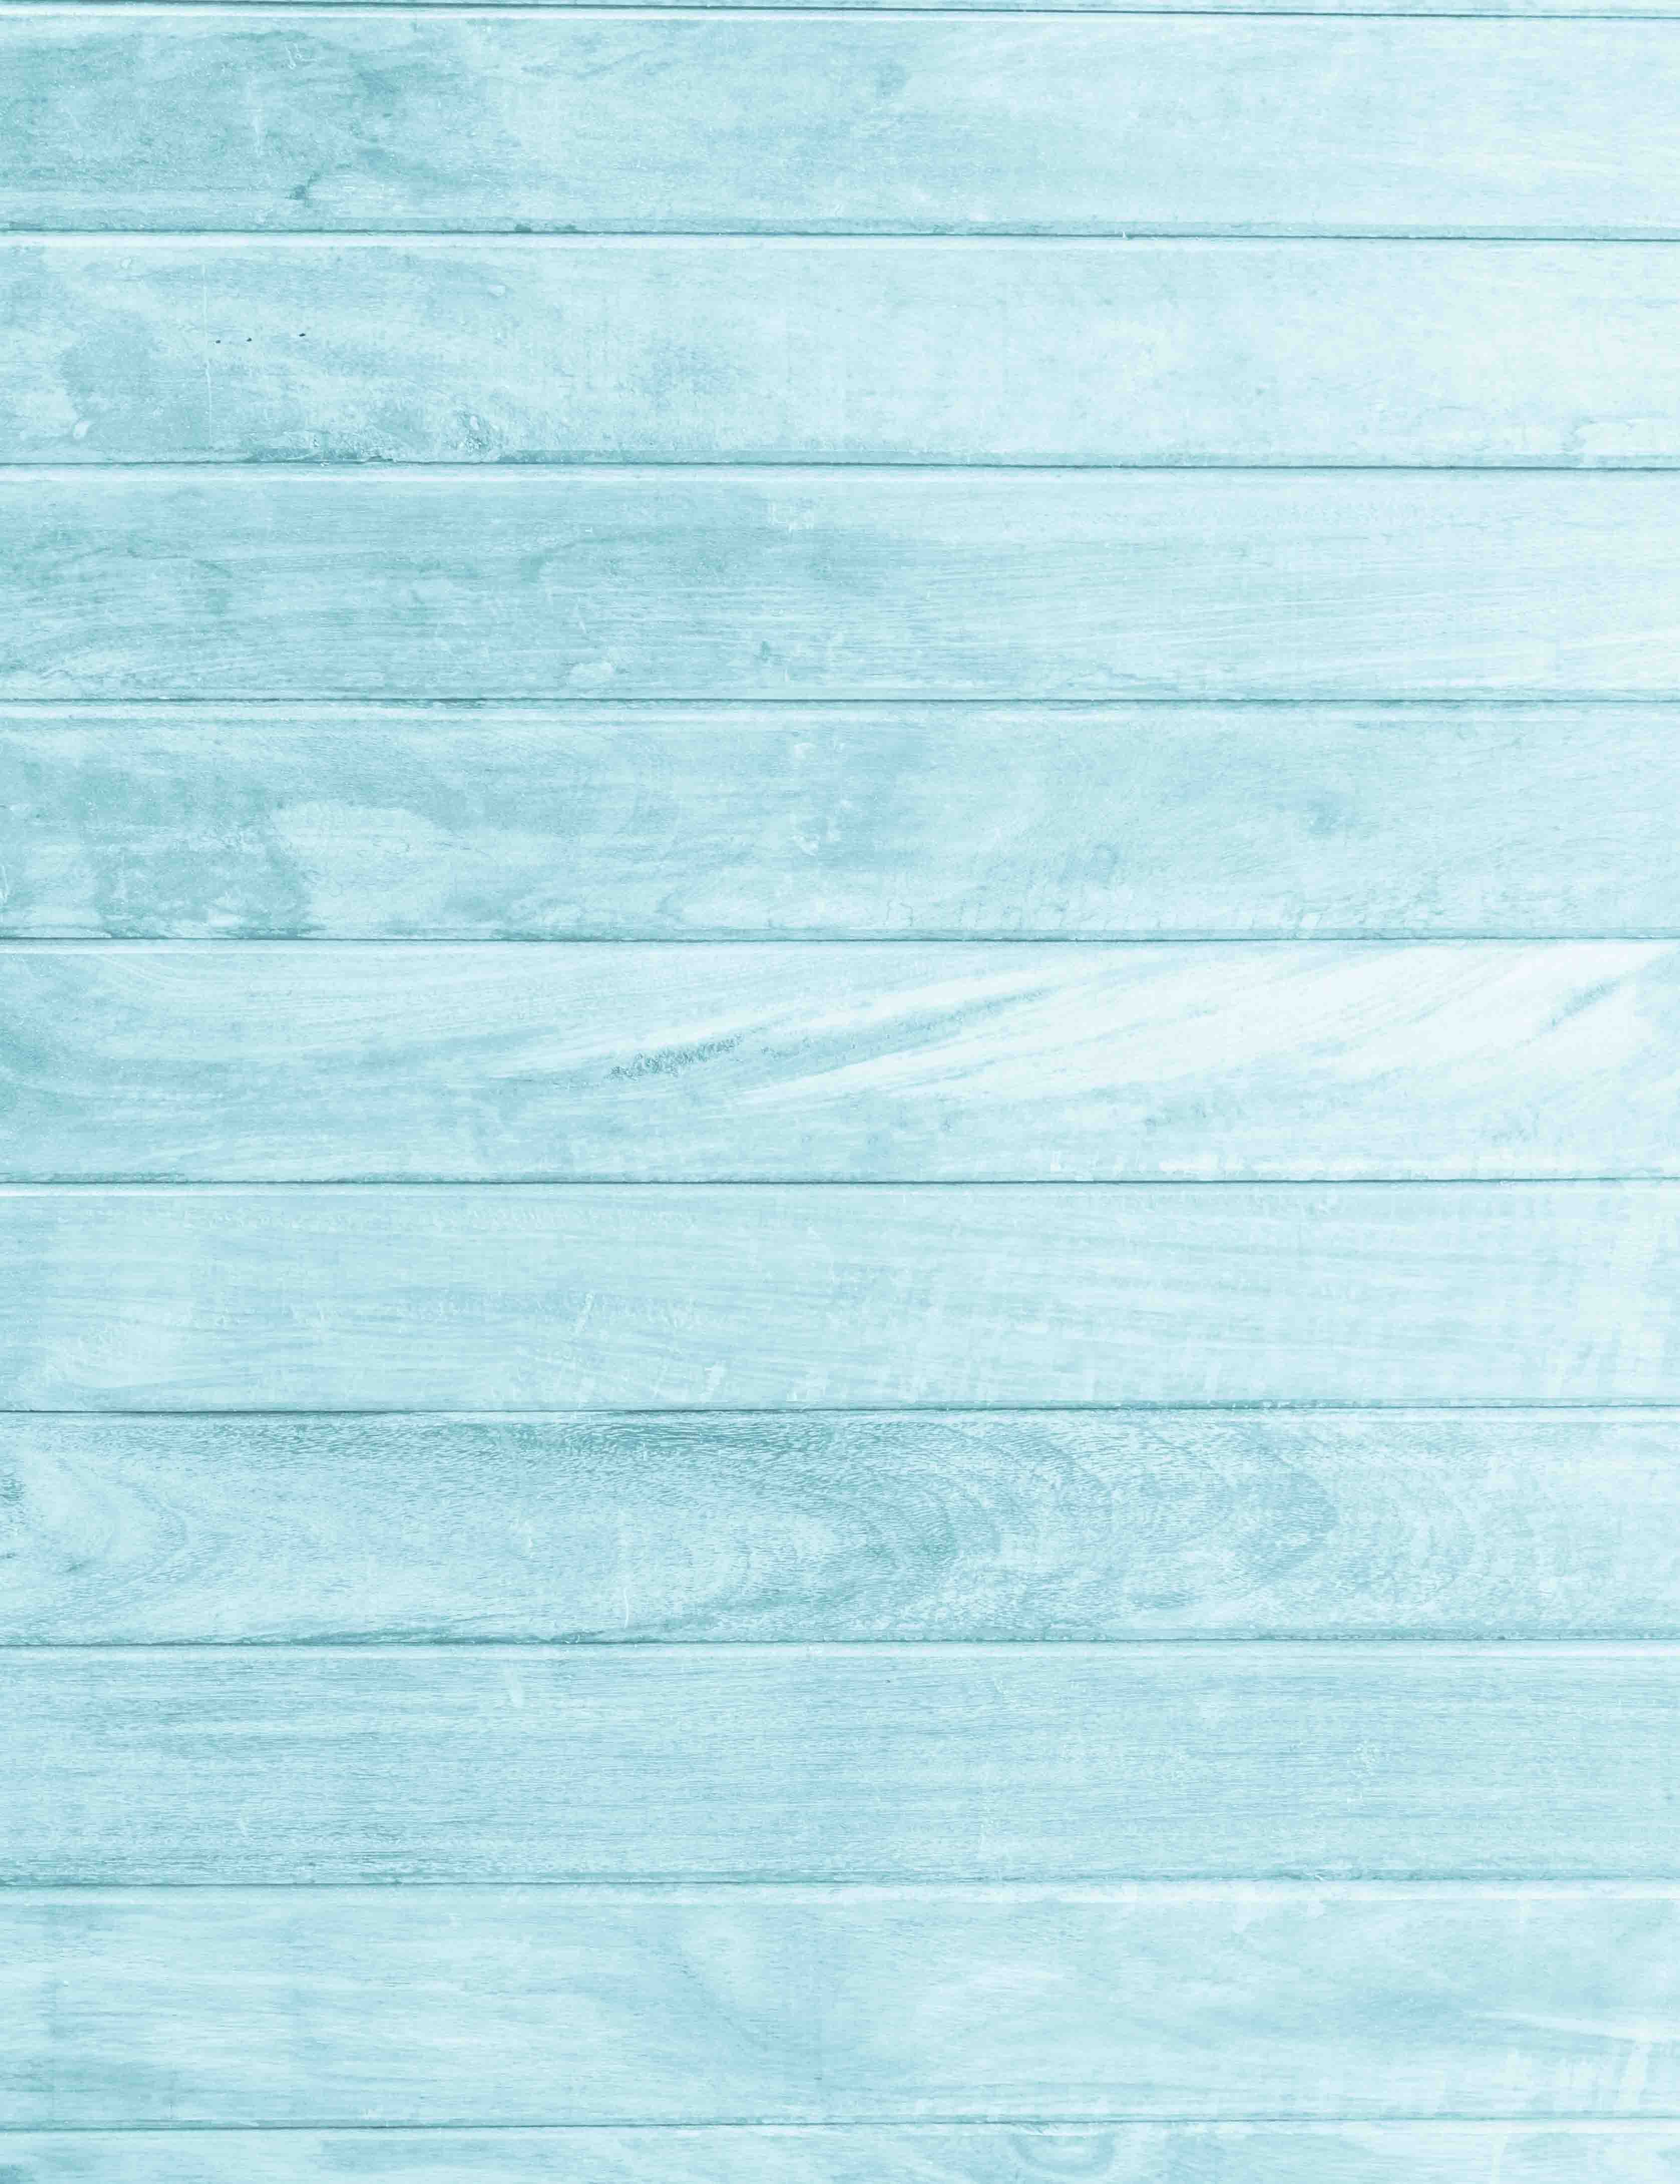 Lighter Sky Blue Wood Floor Texture Backdrop For Baby Photography Shopbackdrop